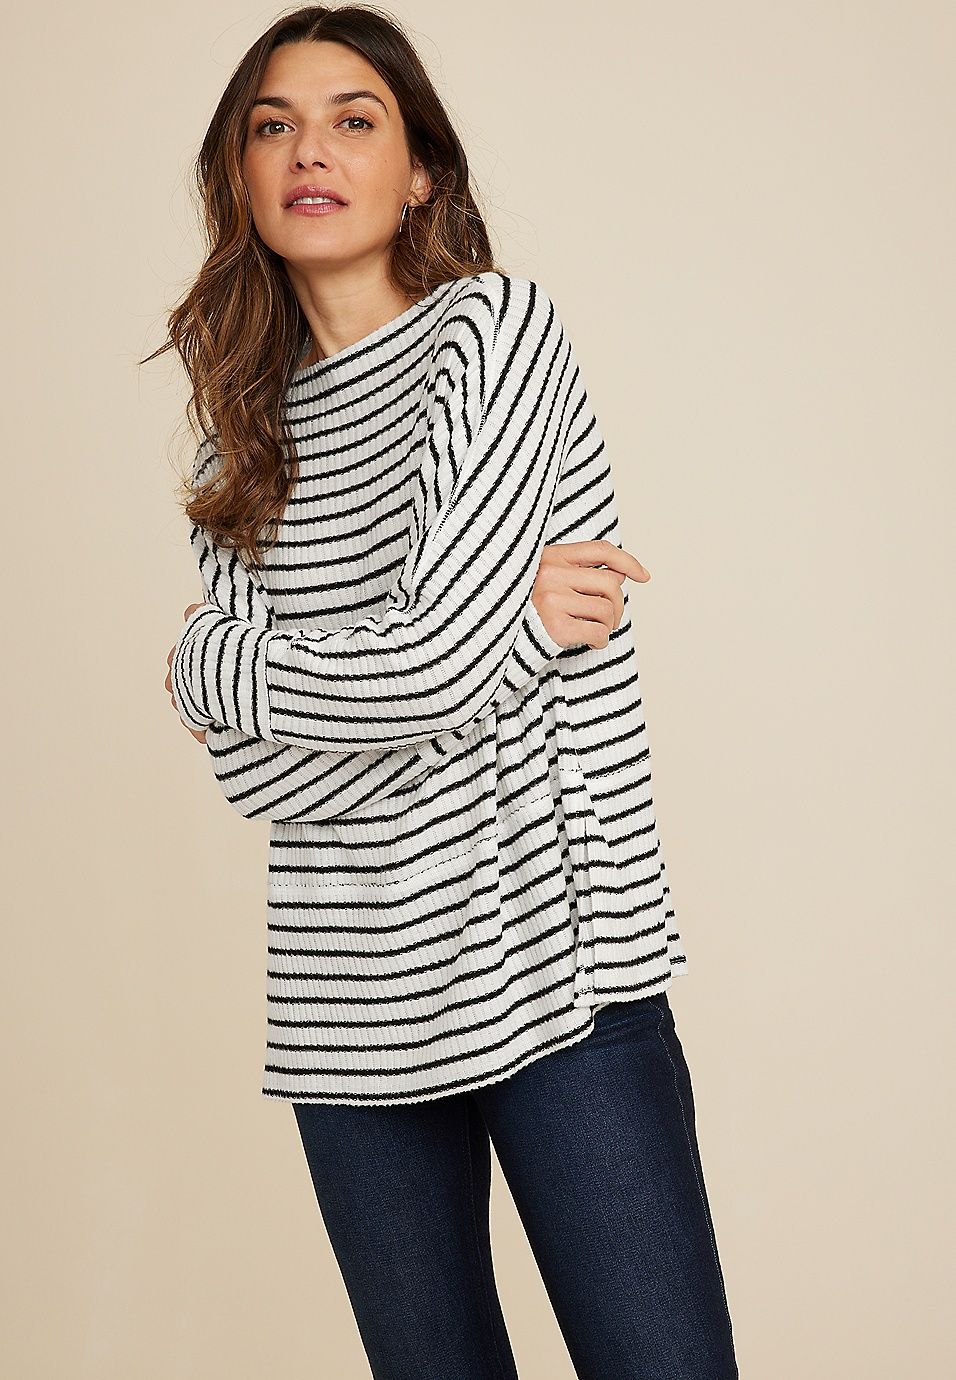 Sylvan Striped Tunic Top | Maurices